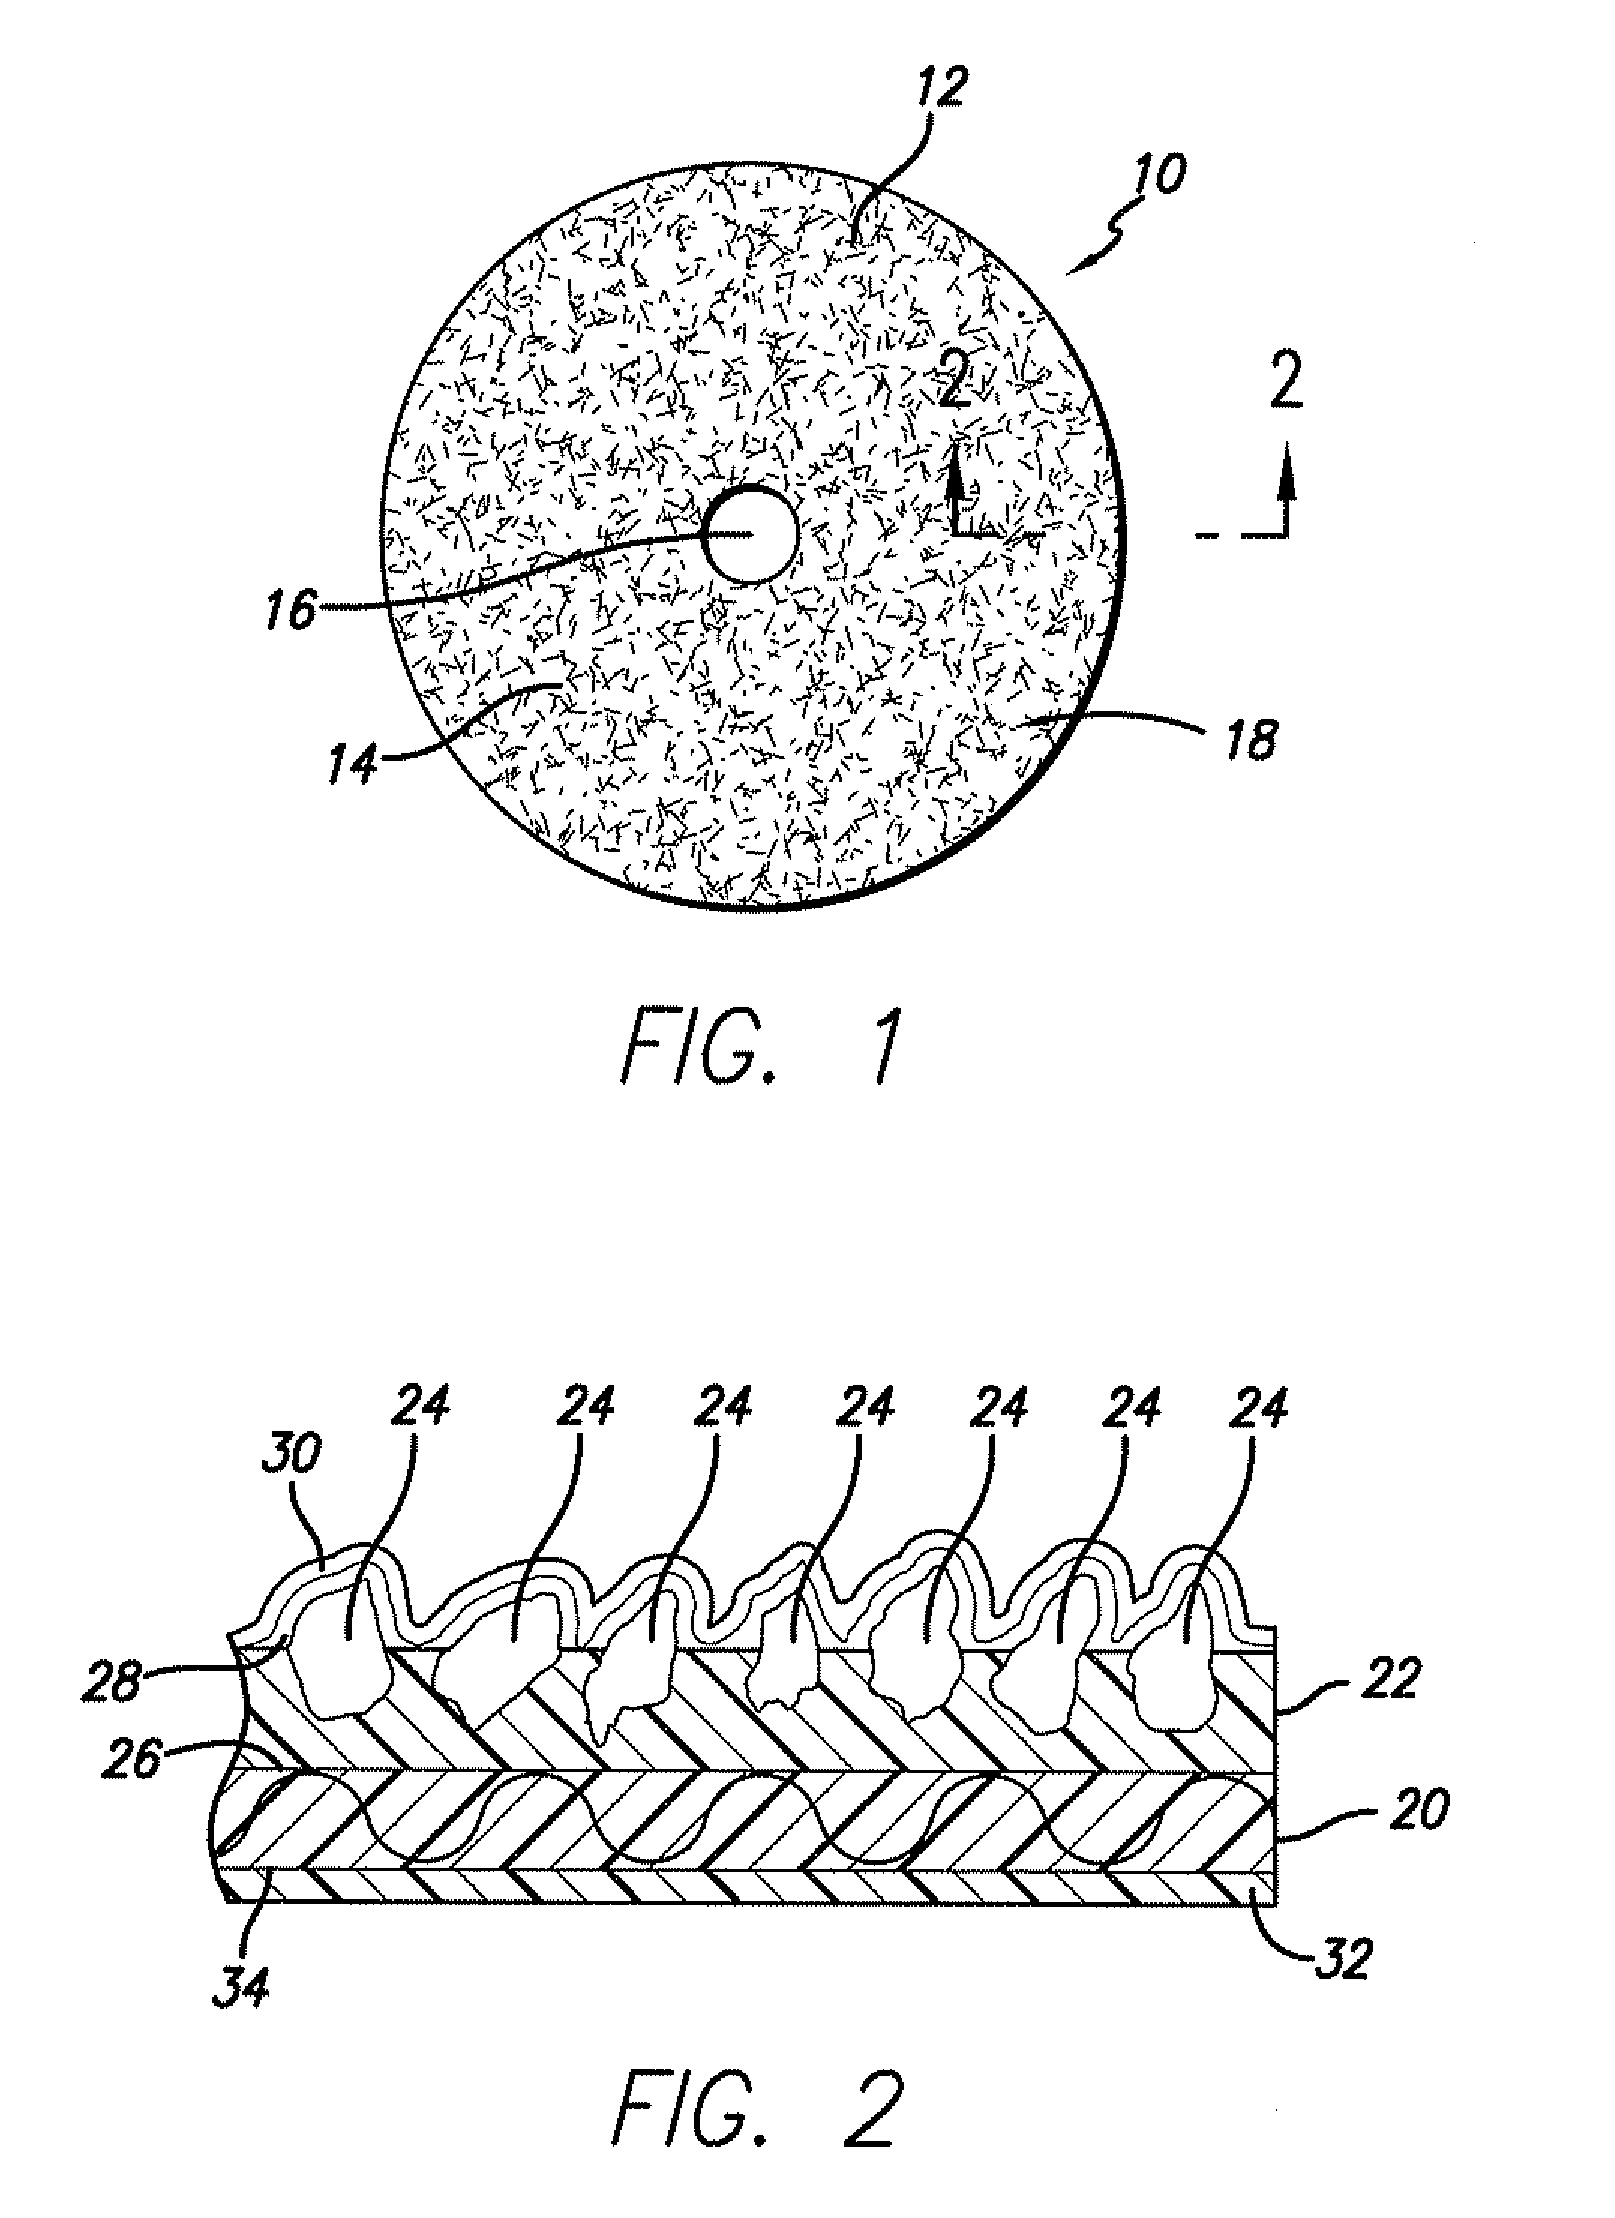 Flexible coated abrasive finishing article and method of manufacturing the same